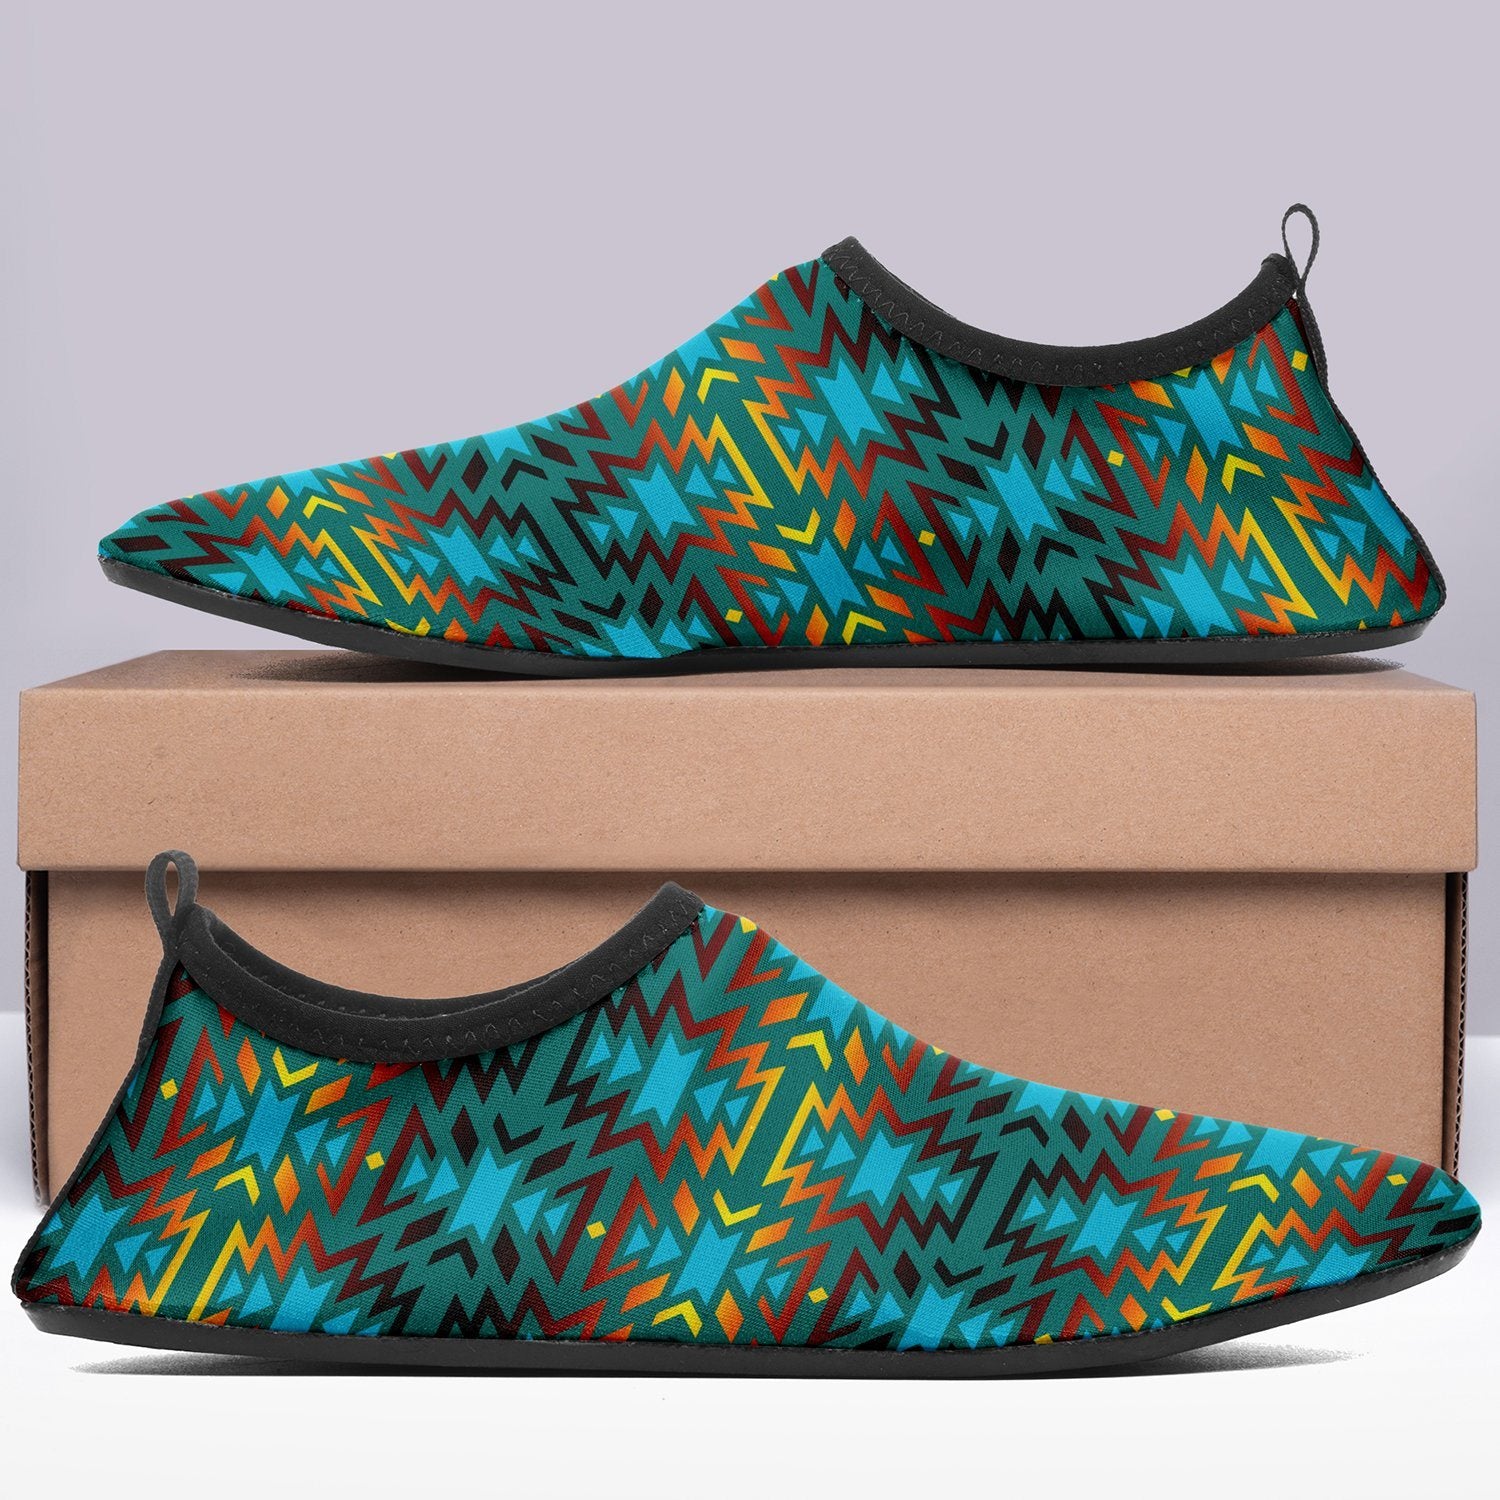 Fire Colors and Turquoise Teal Sockamoccs Slip On Shoes 49 Dzine 